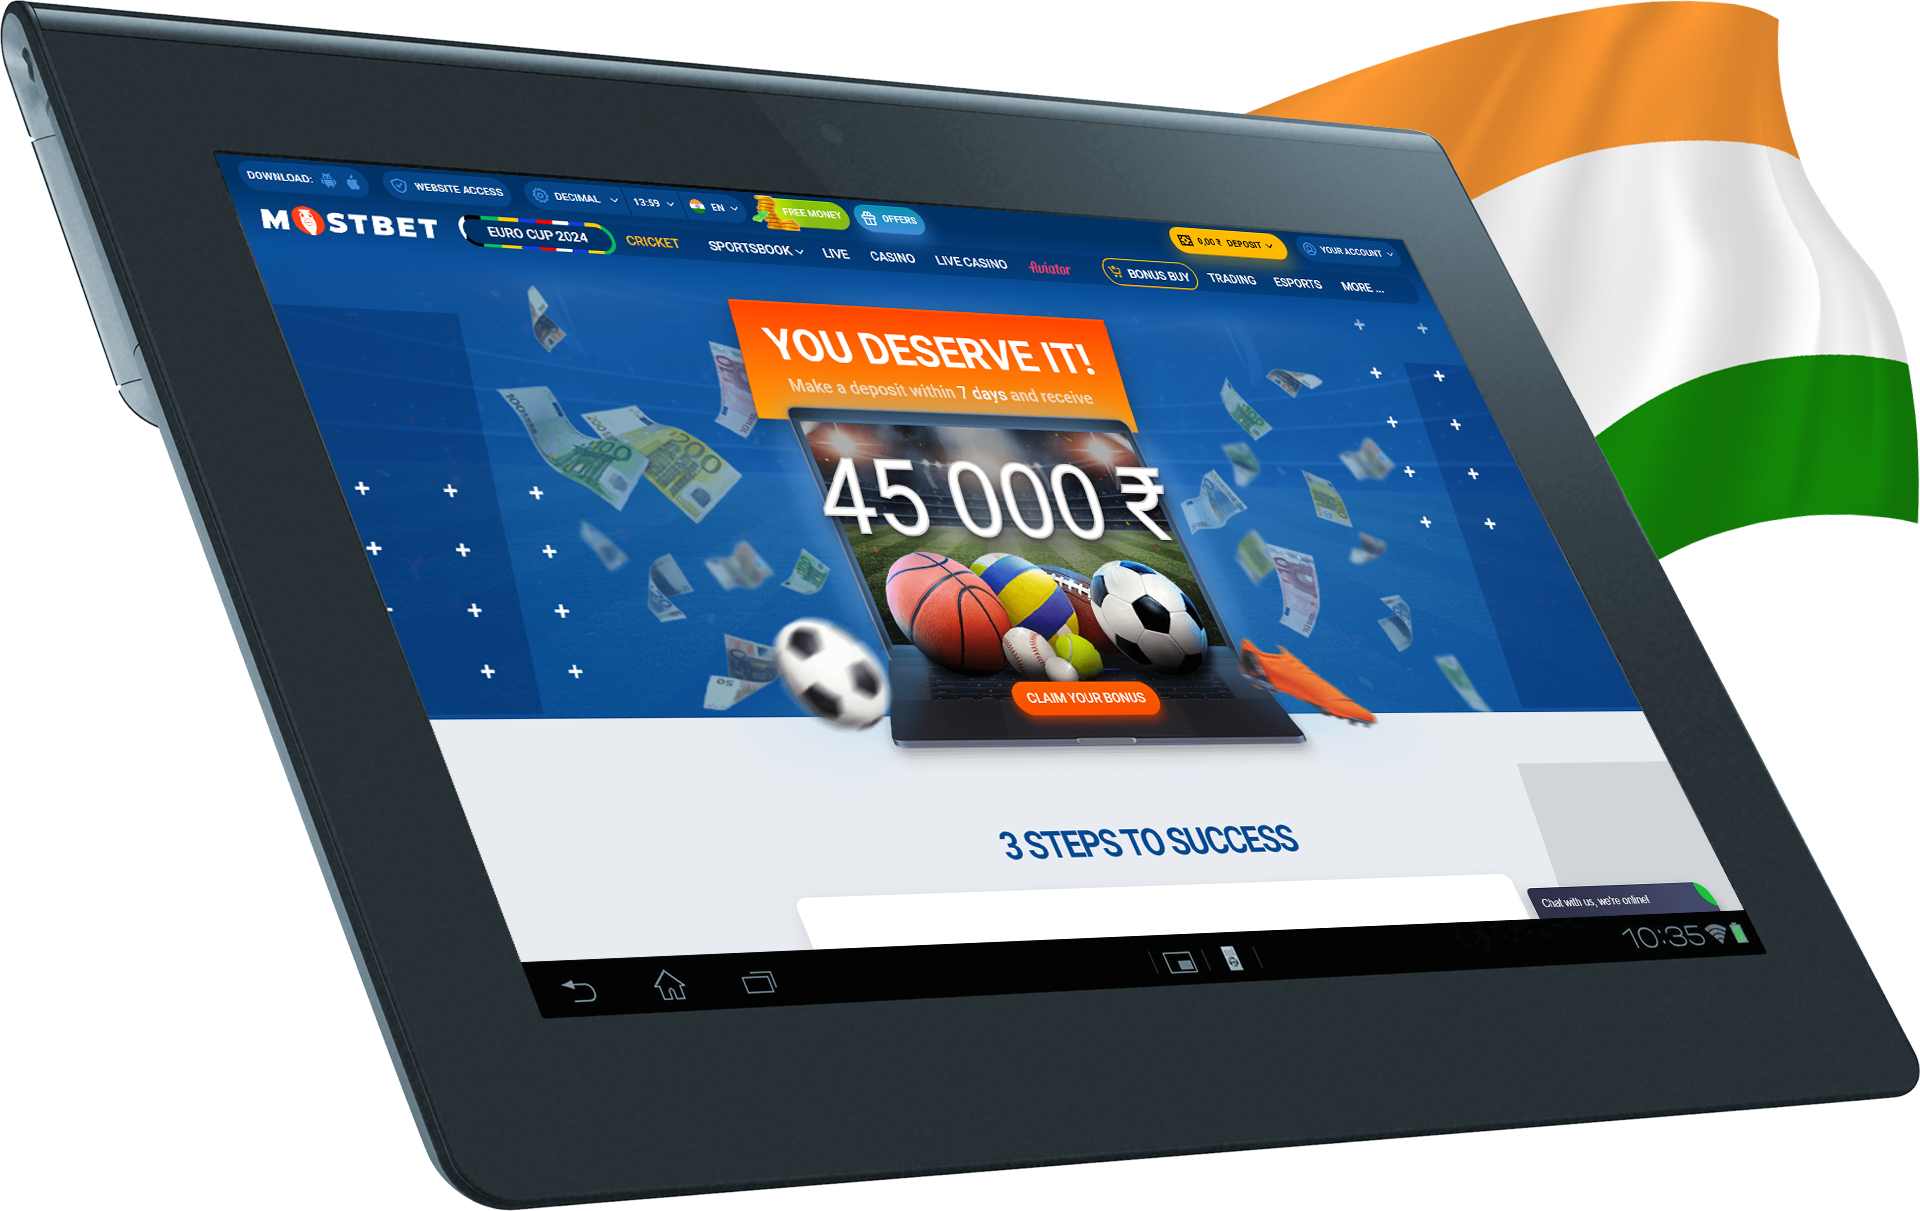 Bonuses when registering with Mostbet